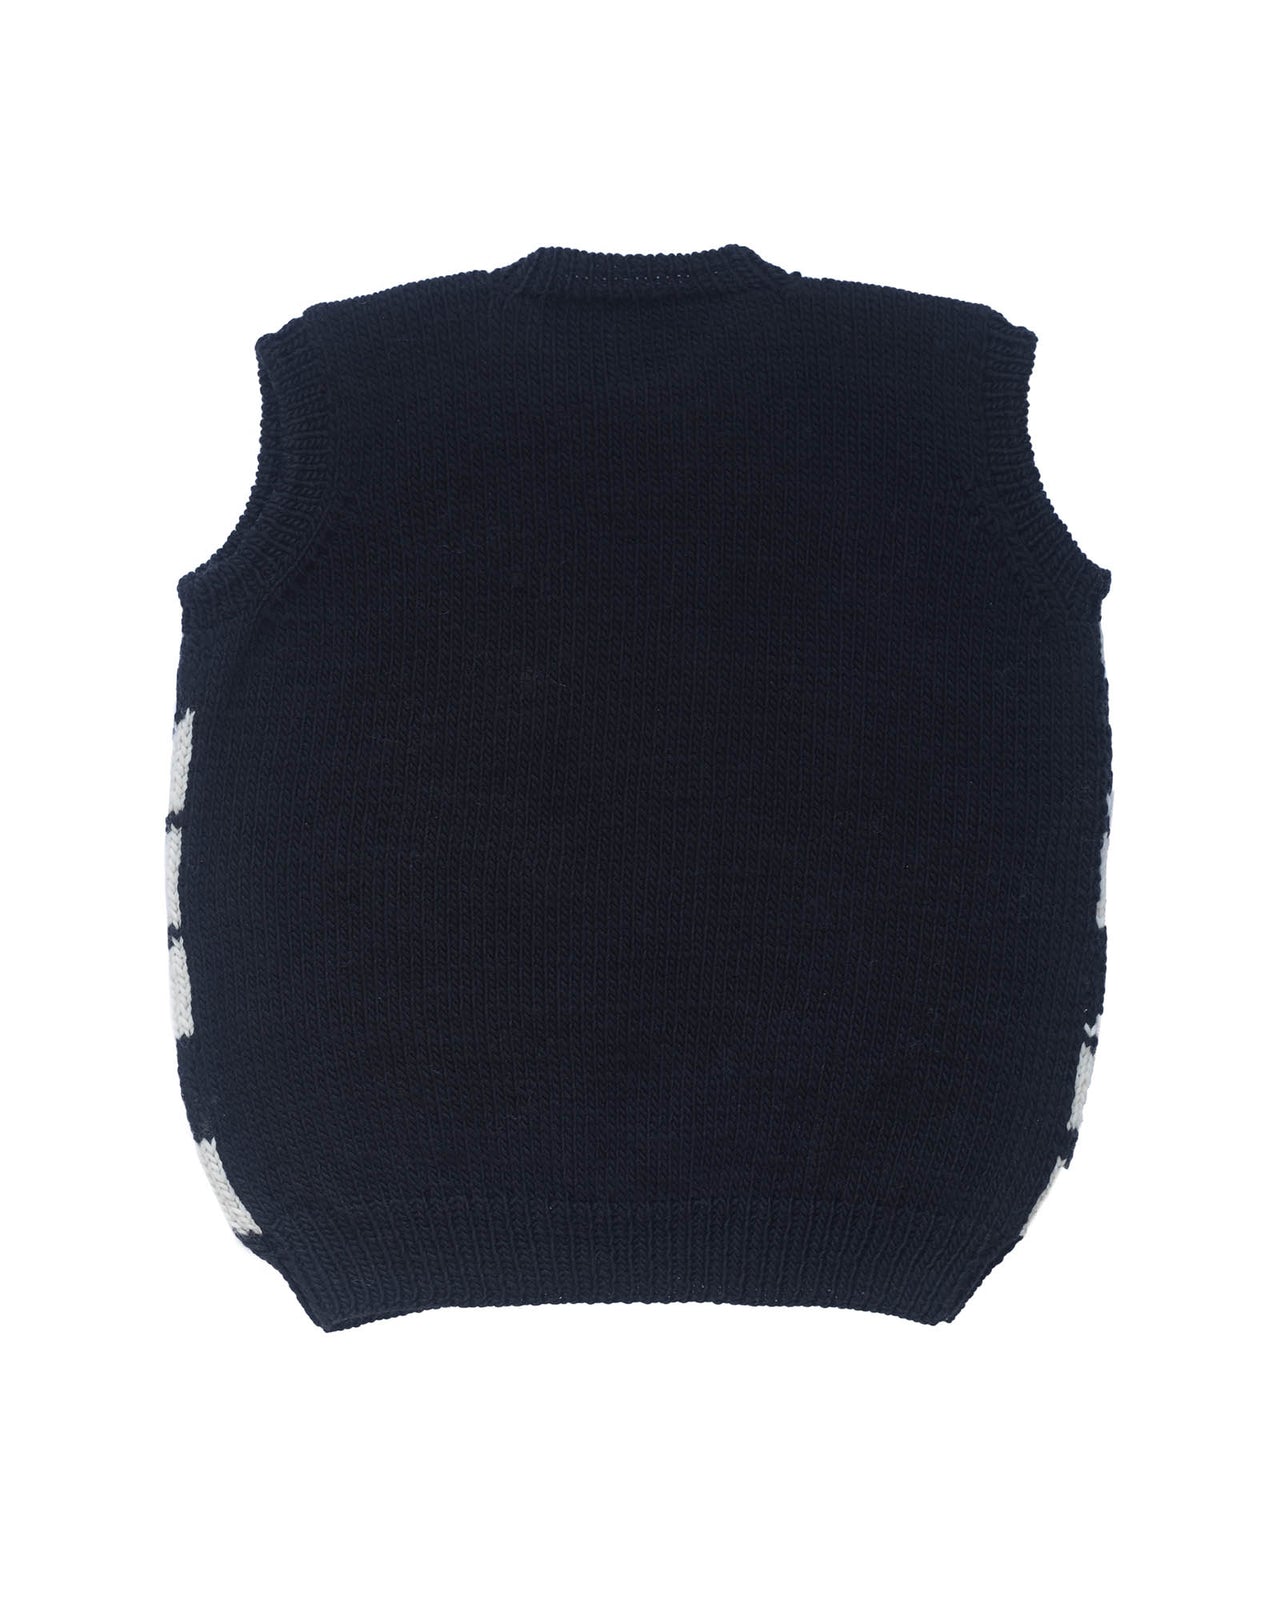 Back of wool vest laid flat on white background. The vest is entirely black behind.